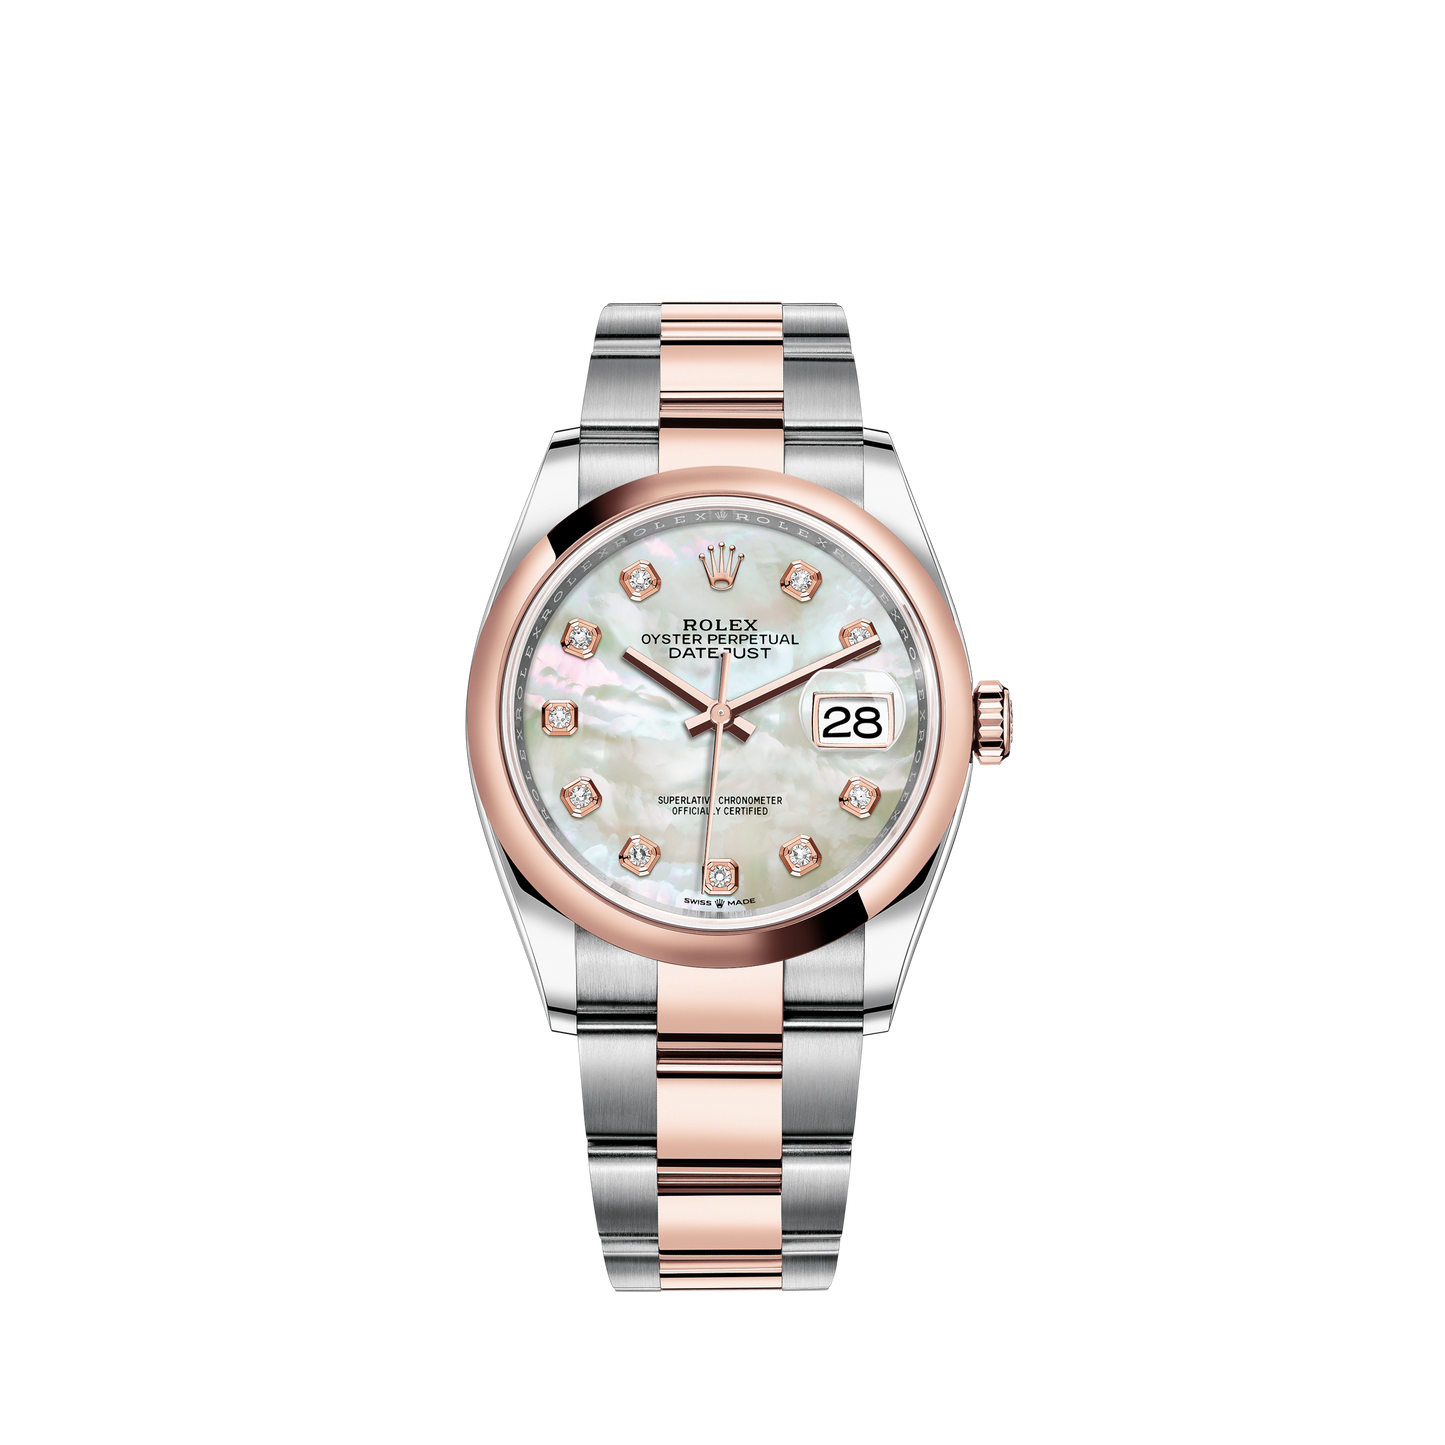 Datejust 36 36mm Oystersteel Jubilee Bracelet and Everose Gold with White Mother-of-Pearl Diamond-Set Dial Domed Bezel